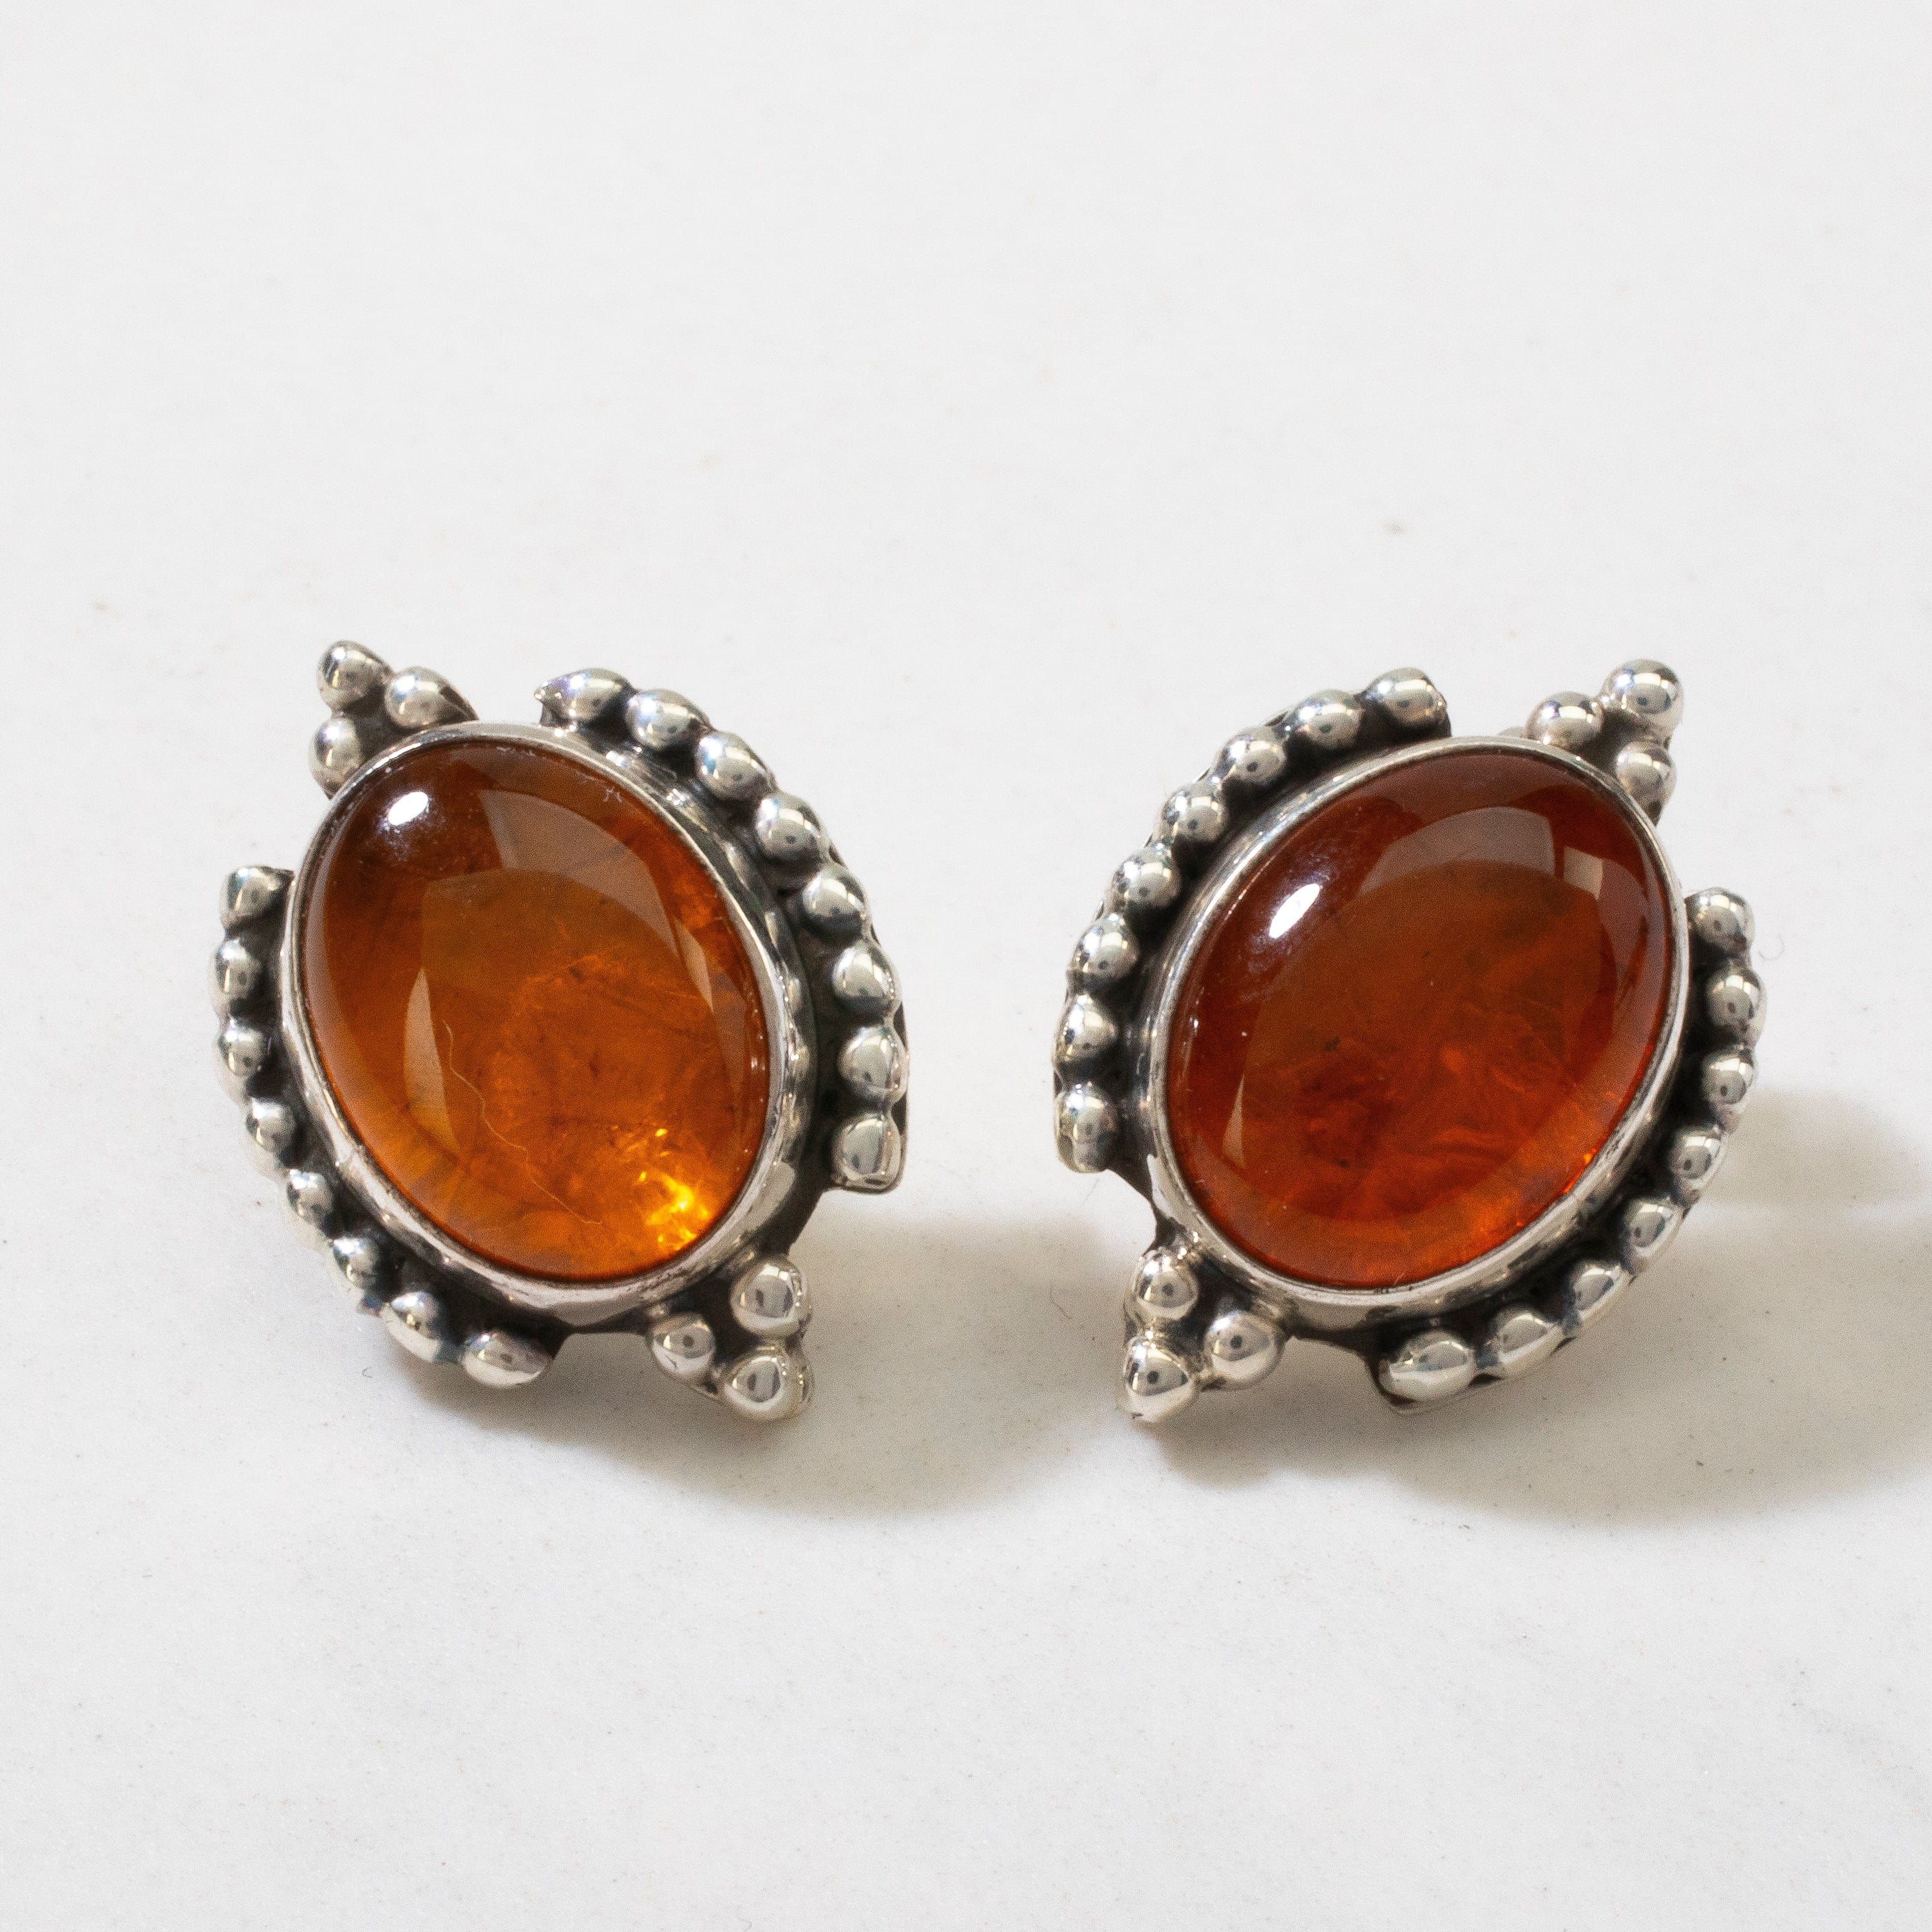 Kalifano Native American Jewelry Baltic Amber Navajo USA Native American Made 925 Sterling Silver Earrings with Stud Backing NAE200.019